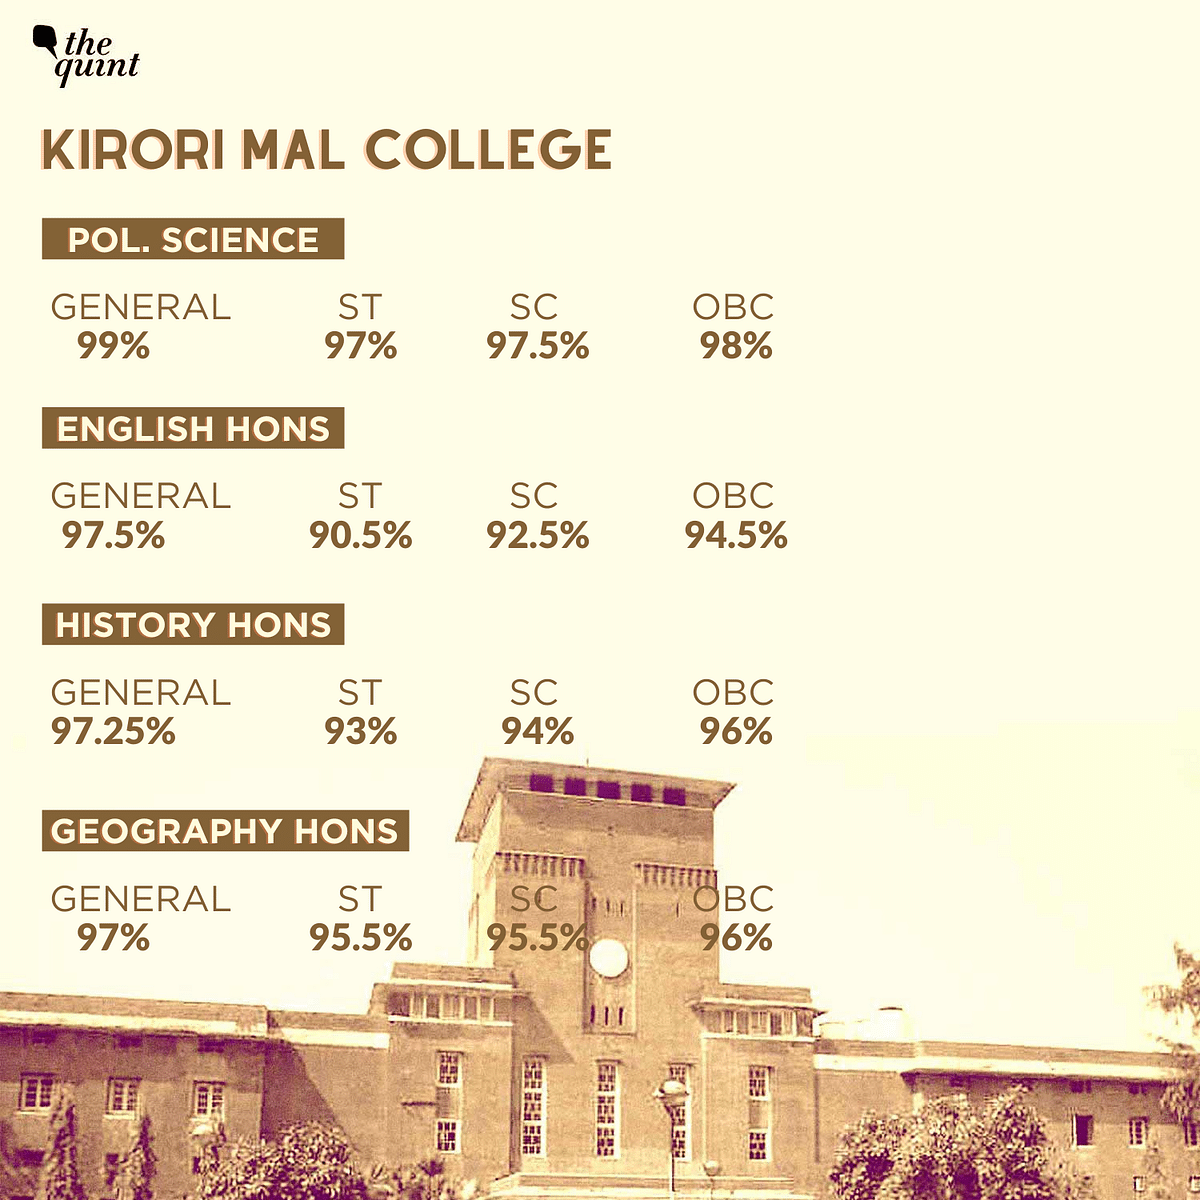 Around 3,53,918 students have registered for admissions to undergraduate courses in DU this year.